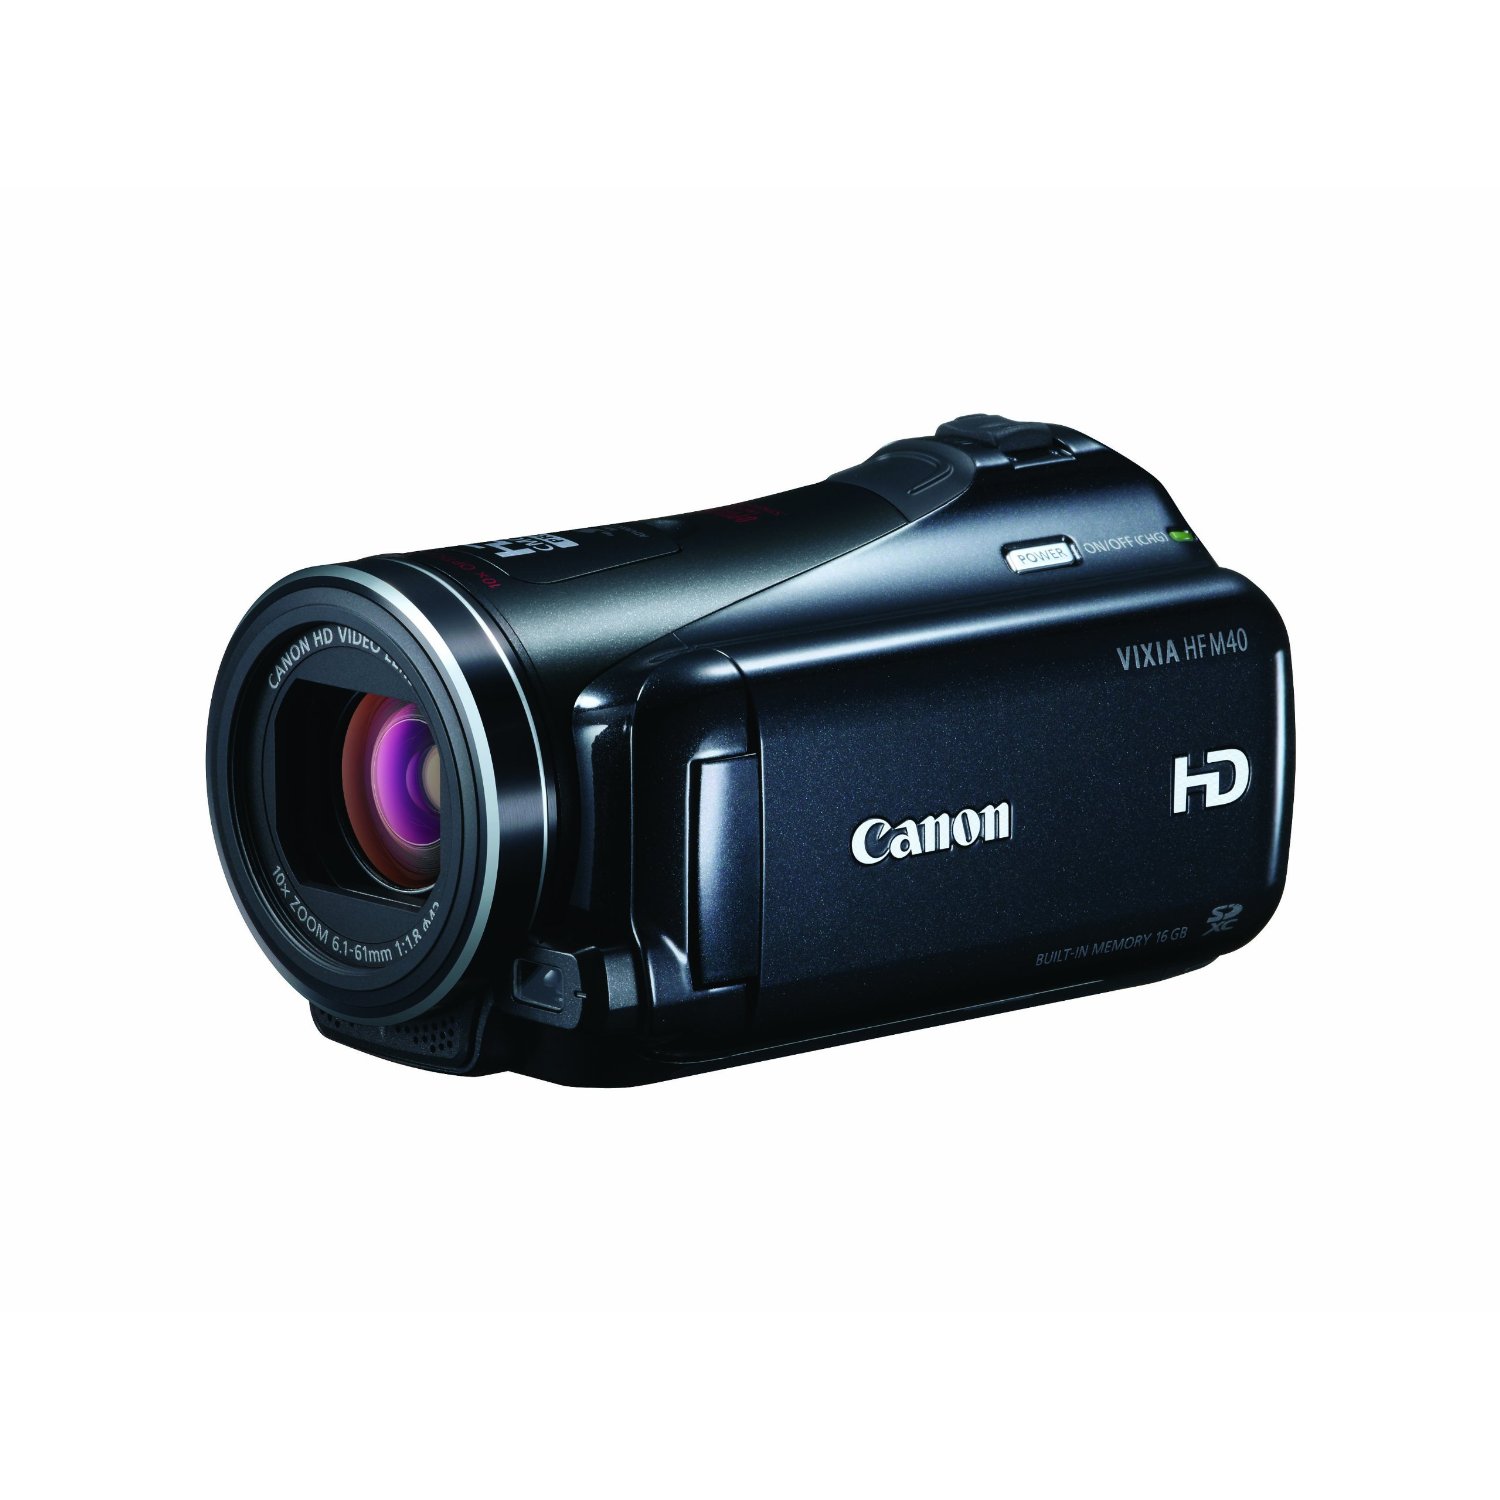 http://thetechjournal.com/wp-content/uploads/images/1111/1320777175-canon-vixia-hf-m40-full-hd-camcorder-with-hd-cmos-pro-1.jpg